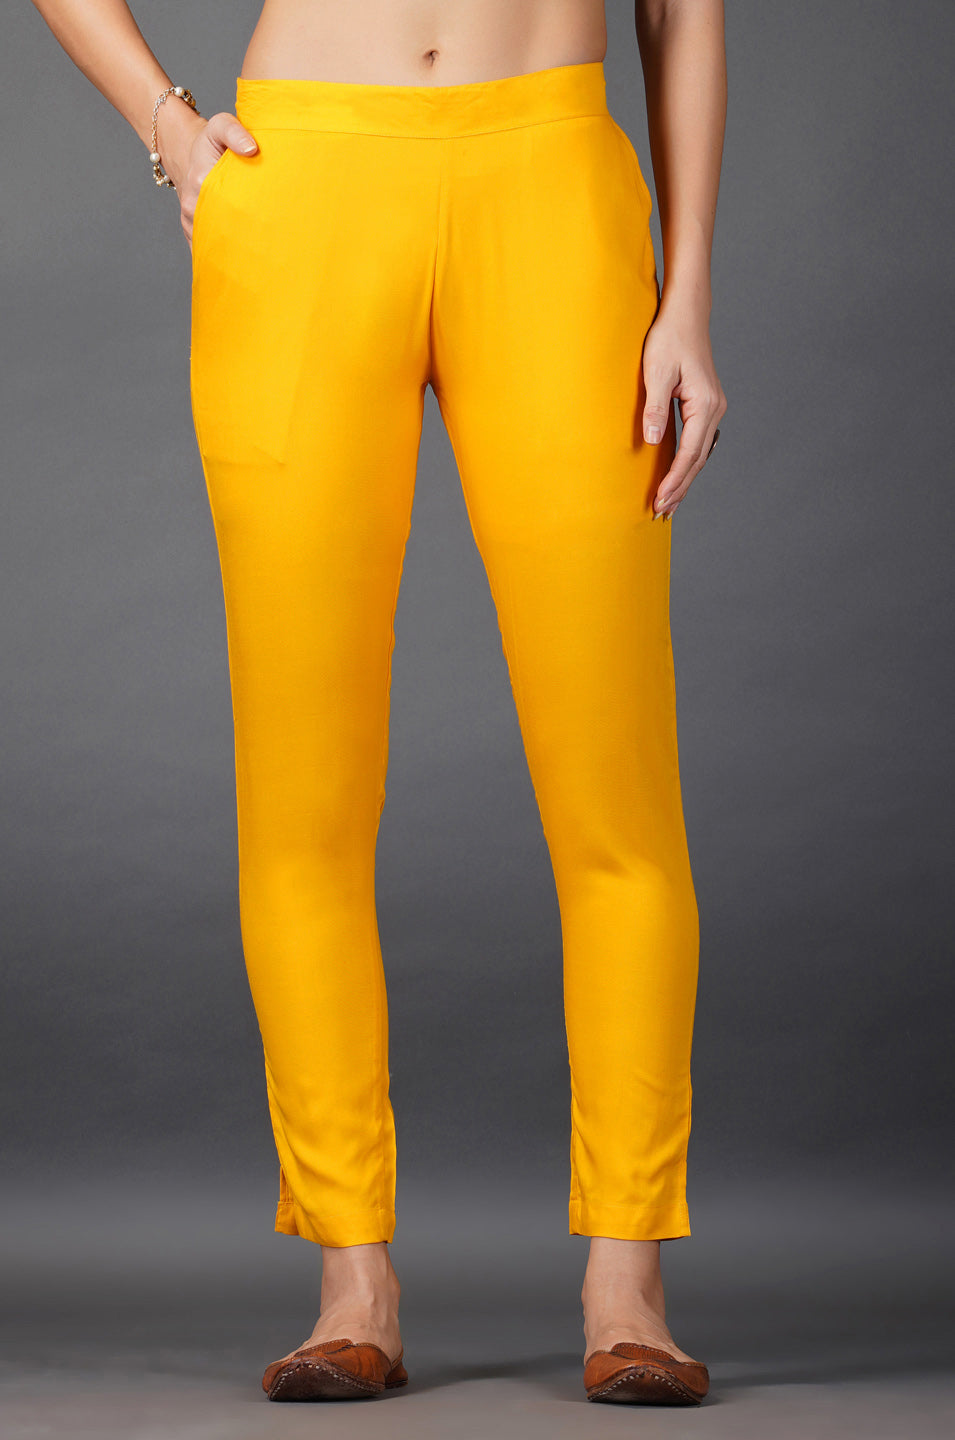 Stylish womens Trousers & Pants / Cigarette Pent for women, MUSTARD YELLOW  Ladies Pant